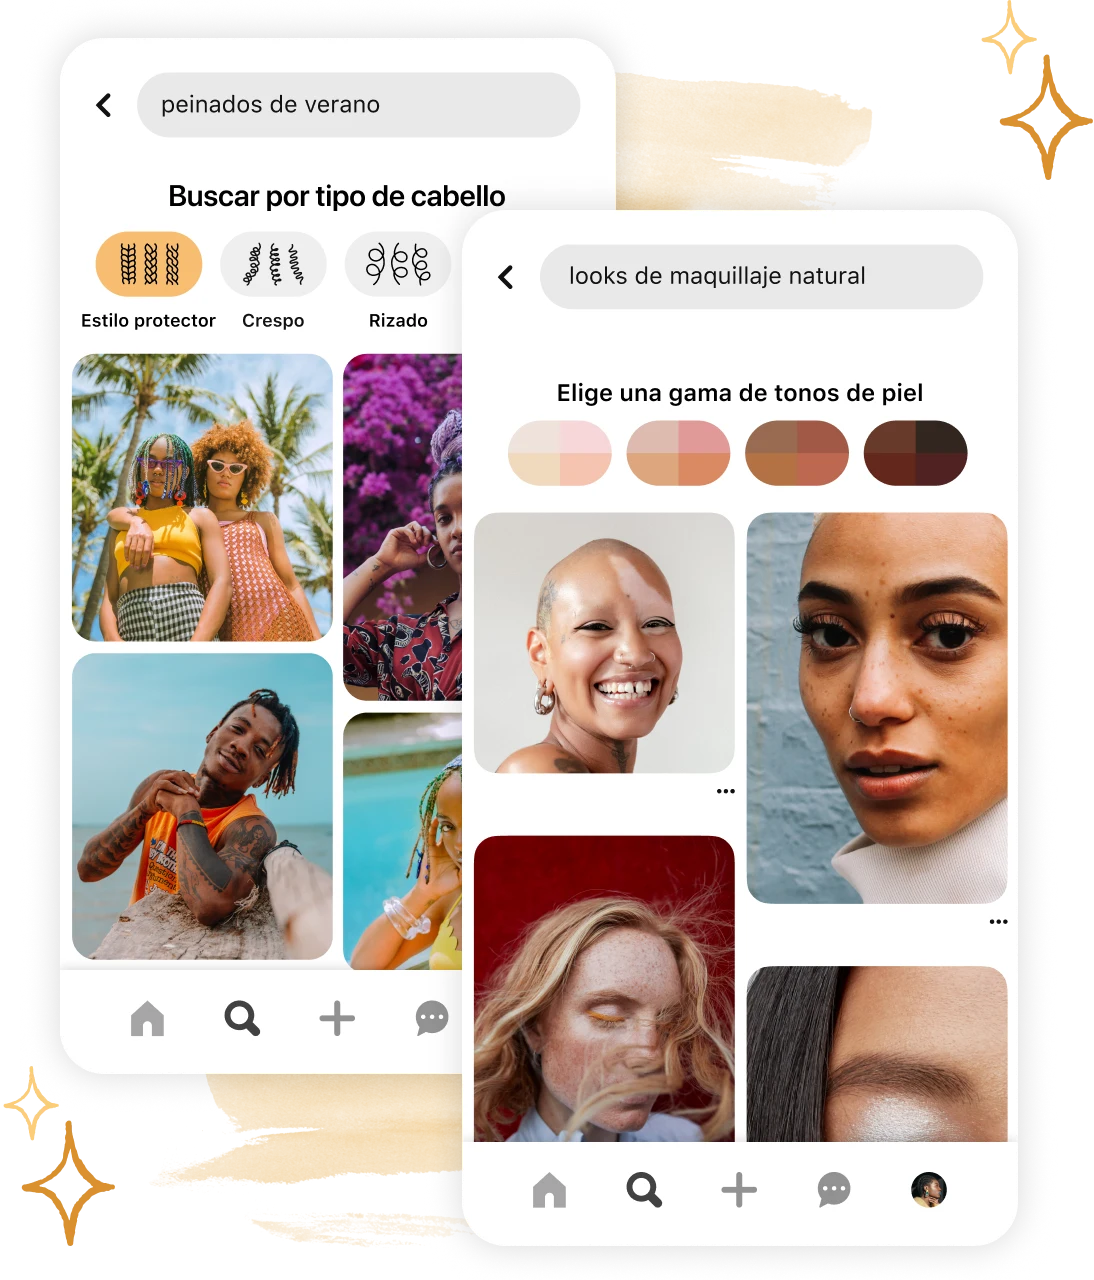 Pinterest app UI showing new search refinement tools for hair pattern and skin tone.